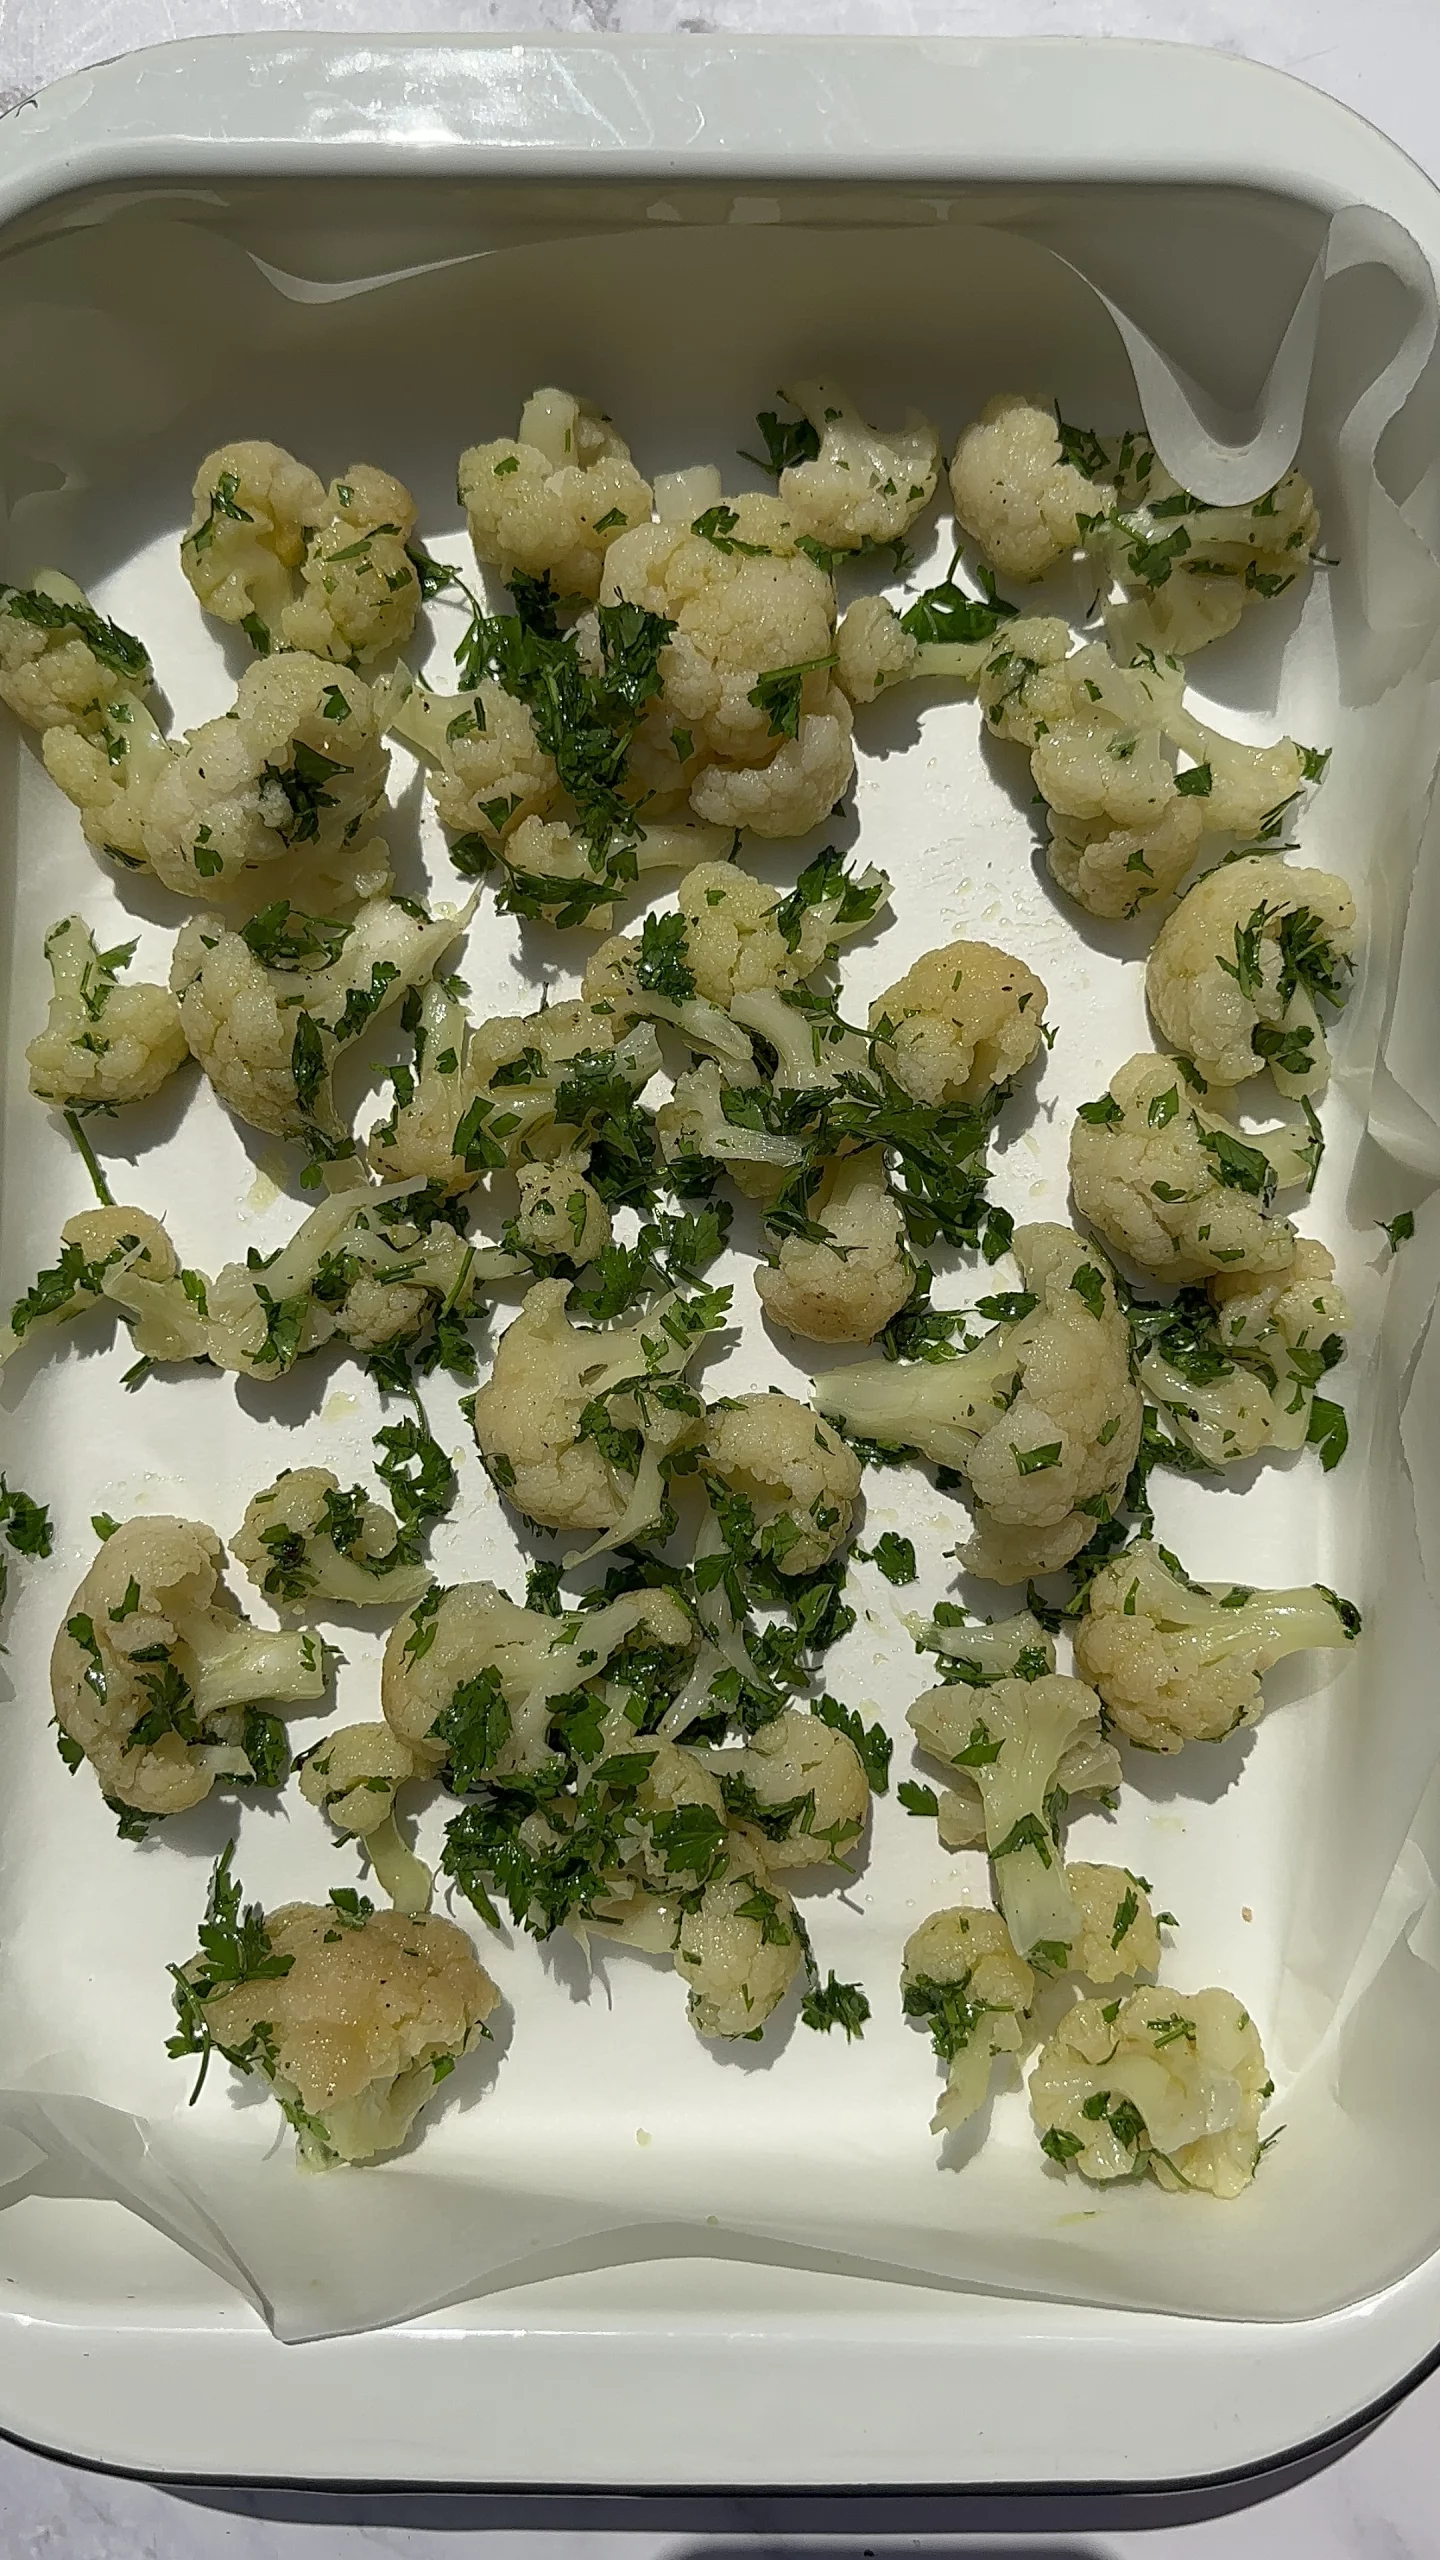 cauliflower florets garnished with chopped parsley and olive oil in a tray before roasting